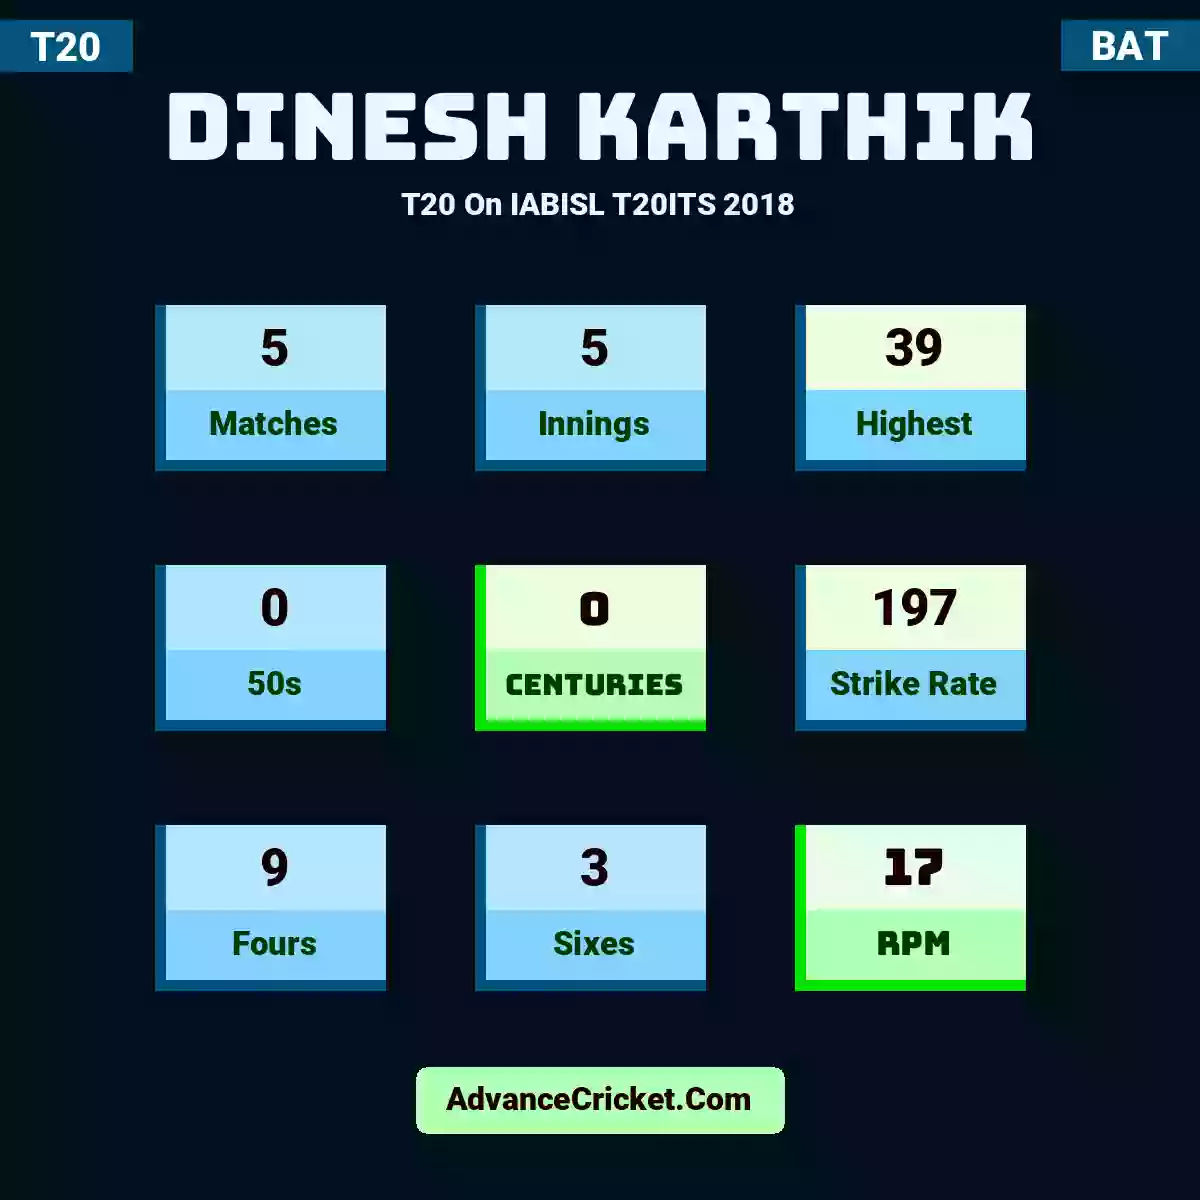 Dinesh Karthik T20  On IABISL T20ITS 2018, Dinesh Karthik played 5 matches, scored 39 runs as highest, 0 half-centuries, and 0 centuries, with a strike rate of 197. D.Karthik hit 9 fours and 3 sixes, with an RPM of 17.